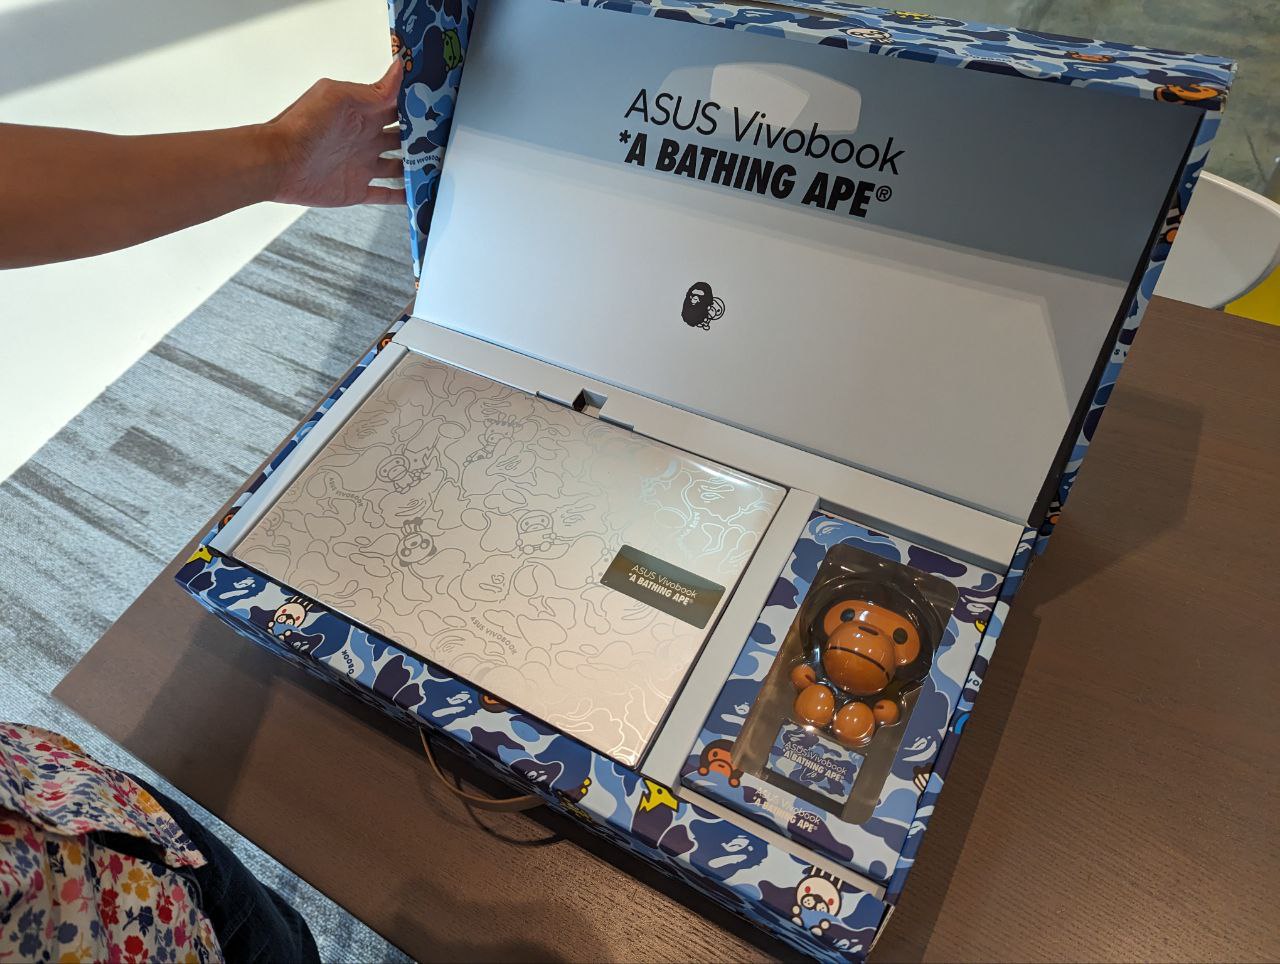 ASUS releases limited edition laptop with A Bathing Ape Baby Milo 